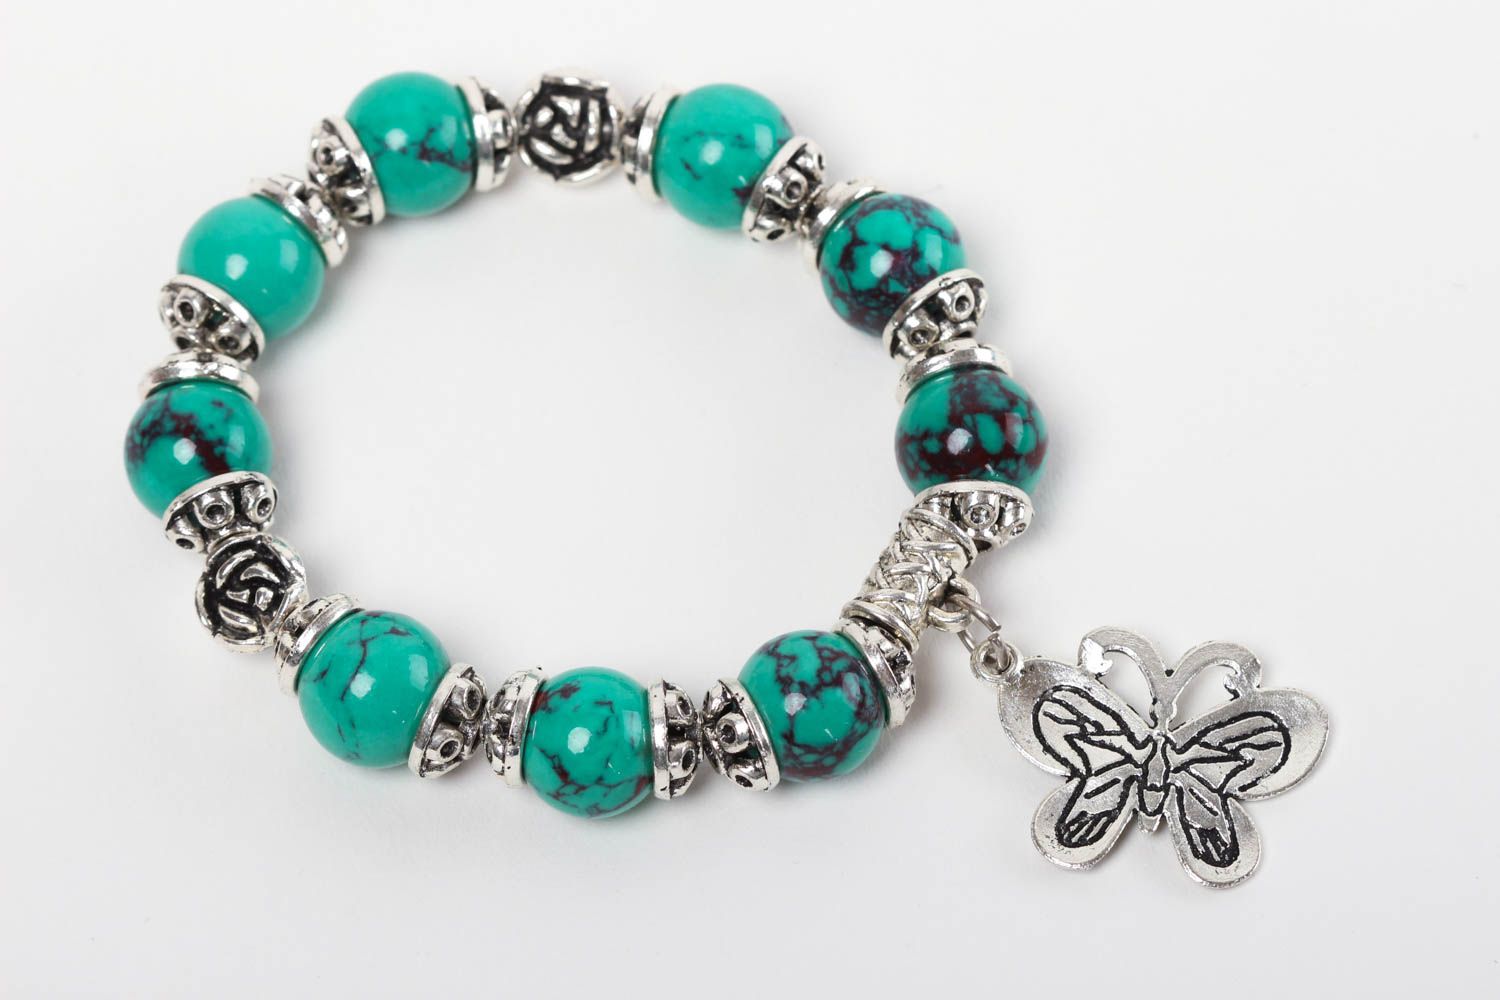 Natural turquoise stone beaded wrist bracelet with metal charms and central butterfly charm photo 2